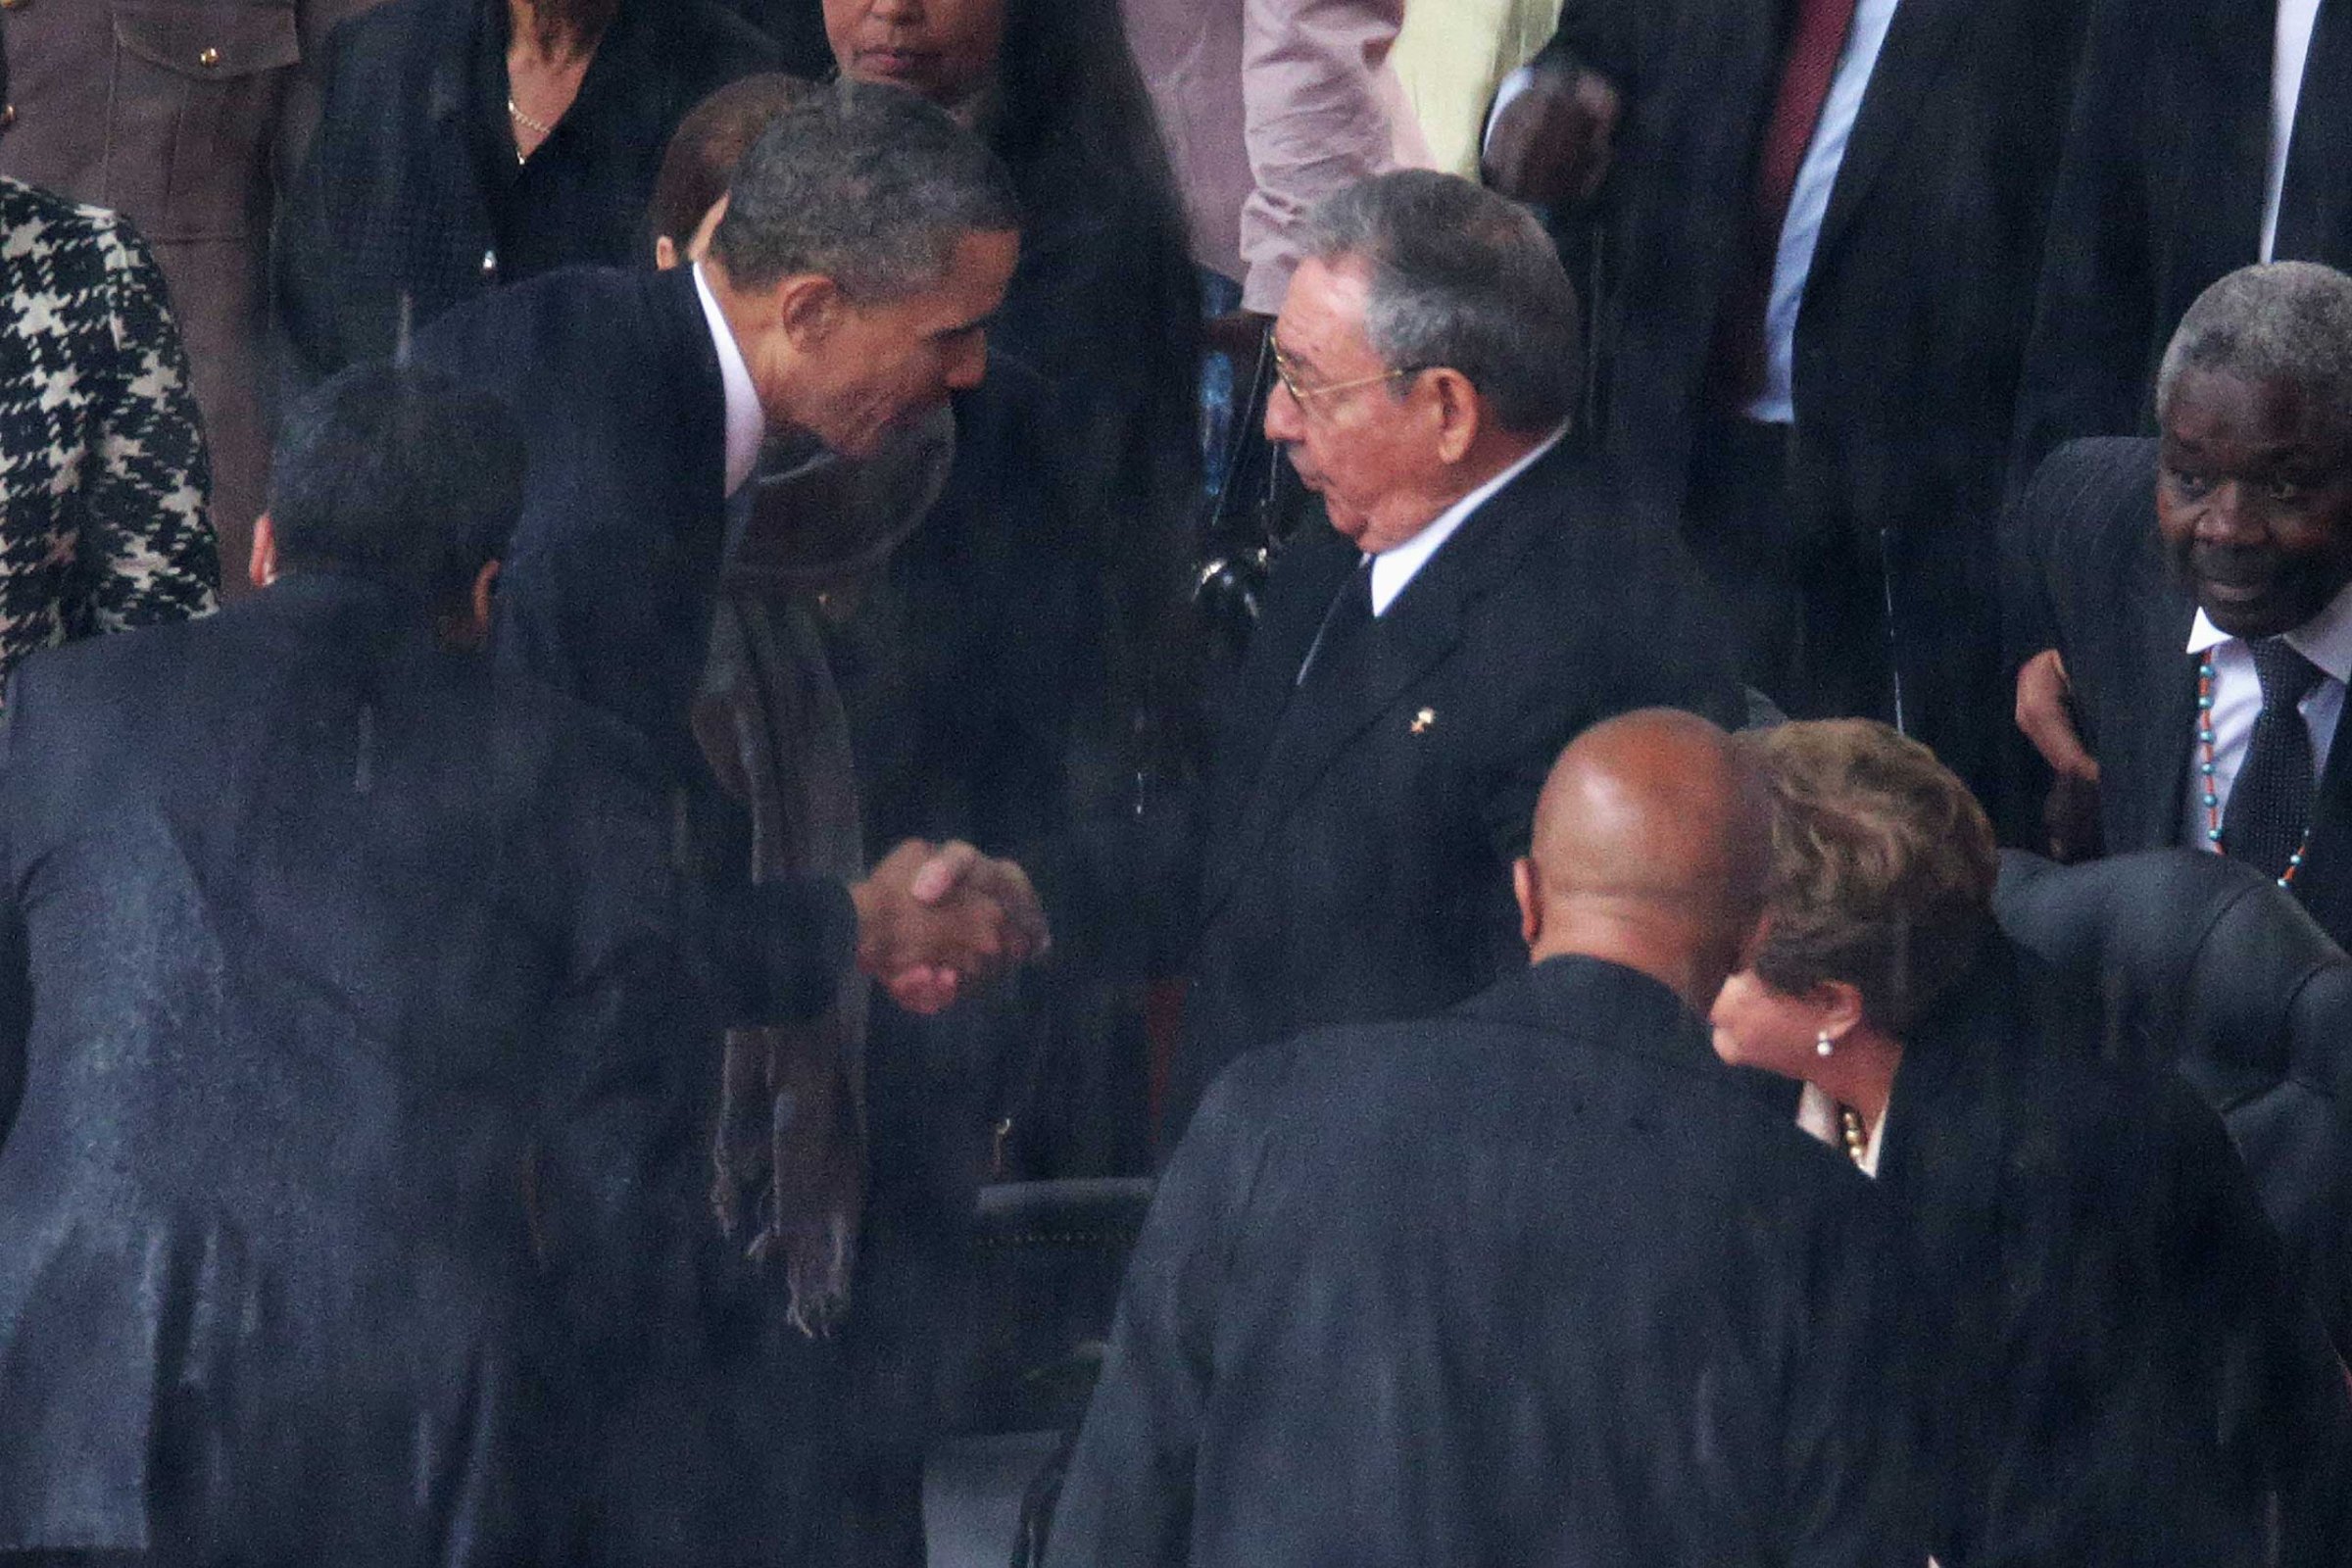 President Barack Obama shakes hands with Cuban President Raul Castro during the official memorial service for former South African President Nelson Mandela at FNB Stadium, Dec. 10, 2013 in Johannesburg, South Africa.